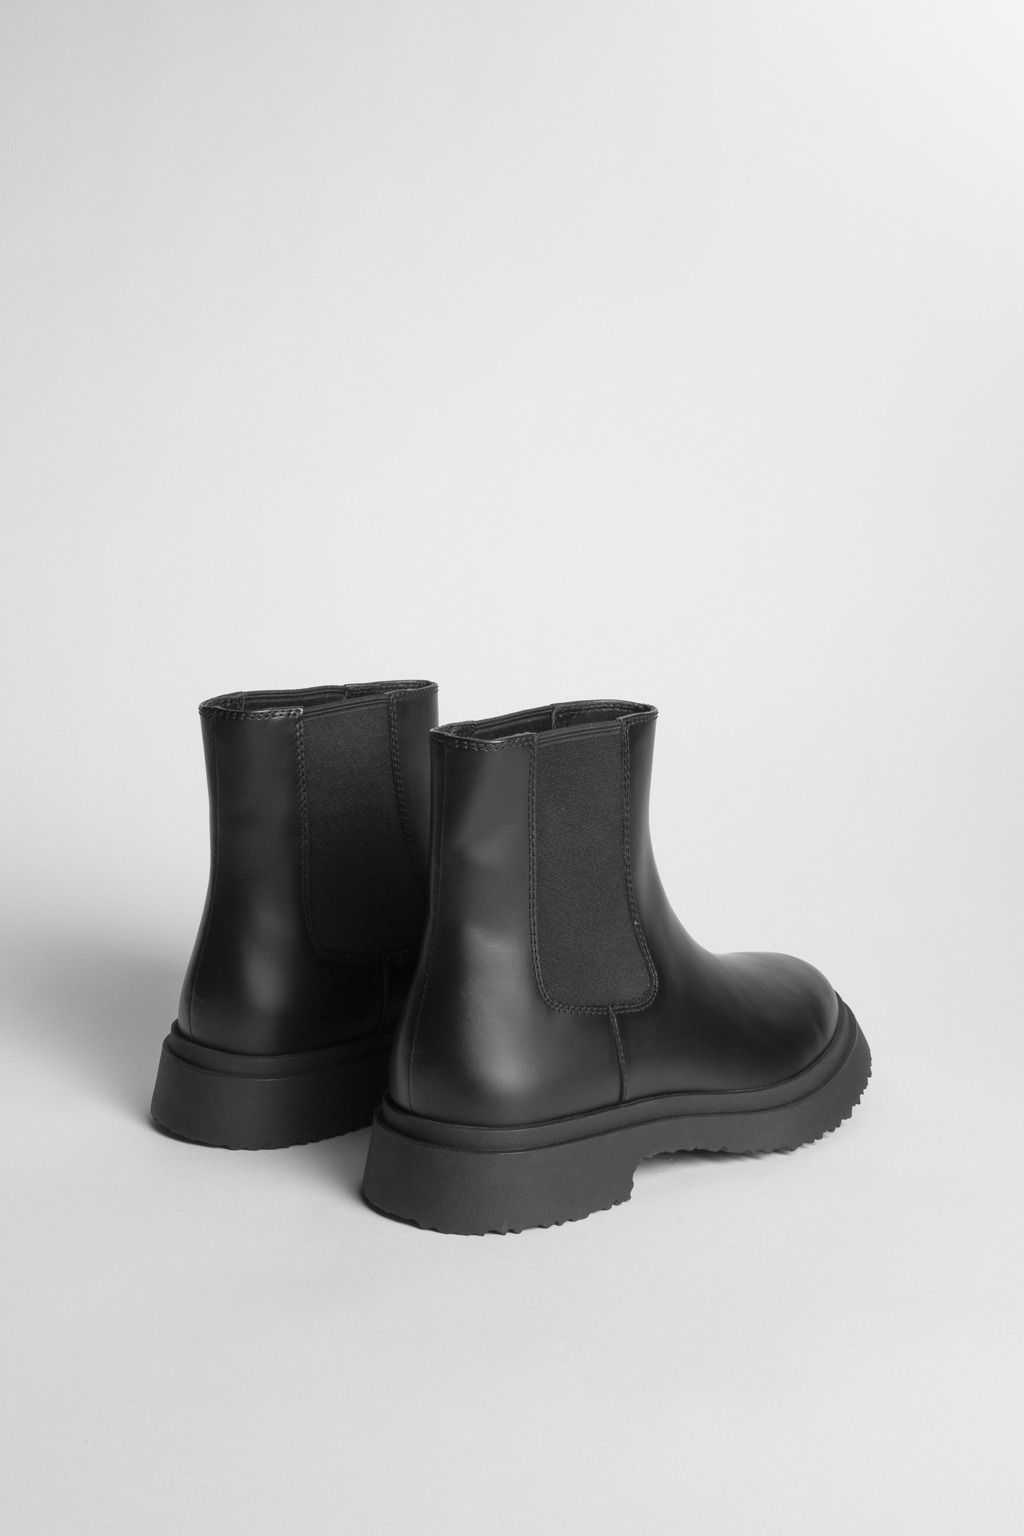 Walden Black Ankle Boots for Men - Fall/Winter collection - Camper 